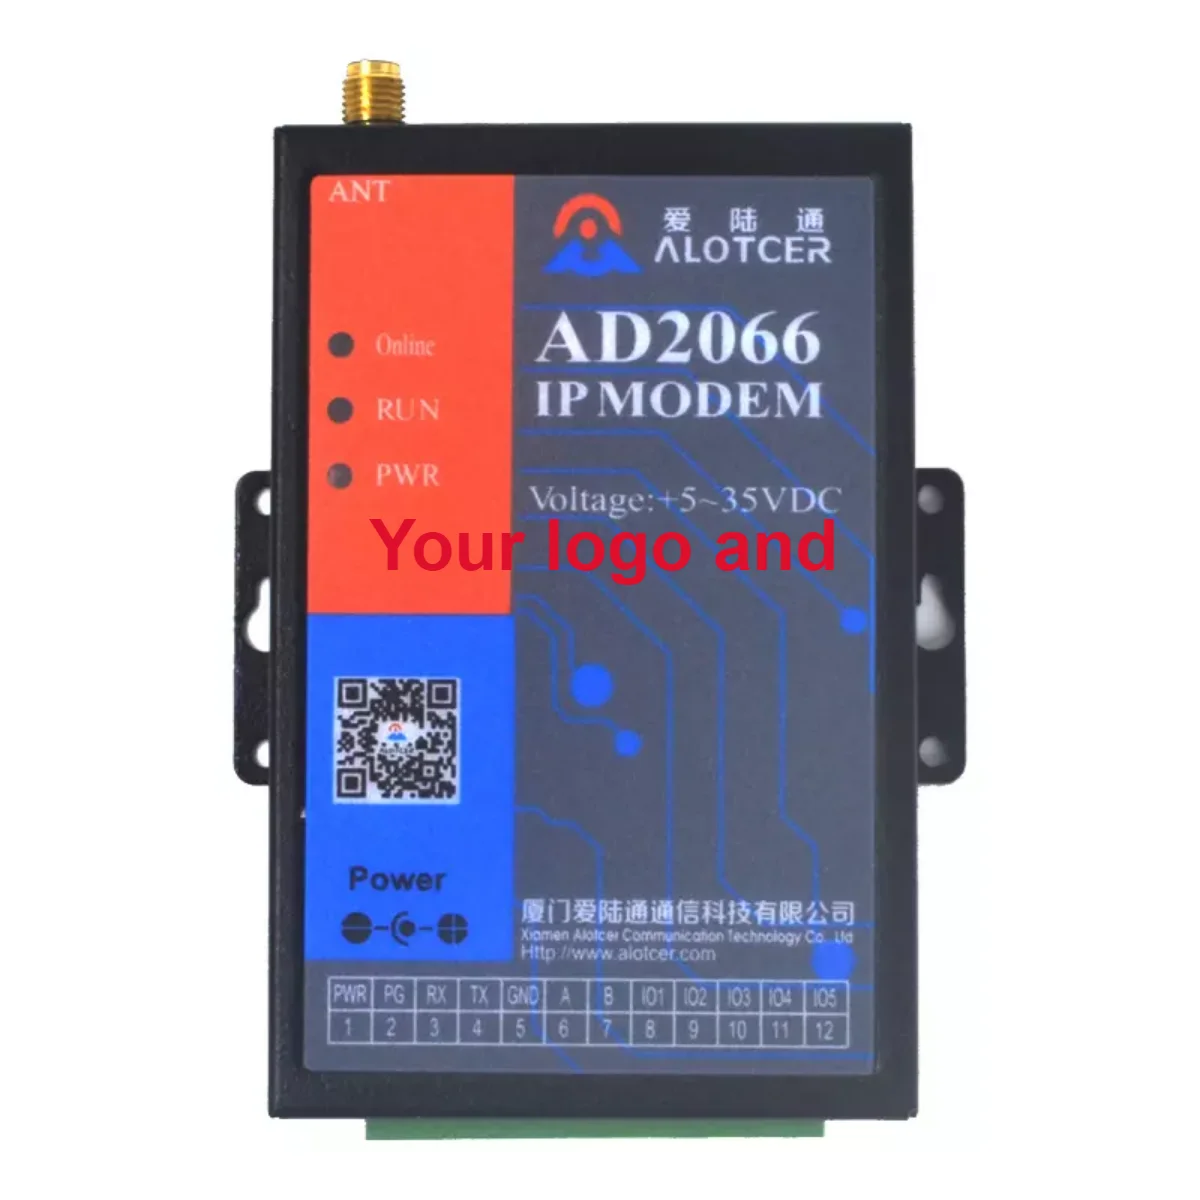 

Iot Din Rail M2m Module 3G Cellular Modem For Plc And Power Meter